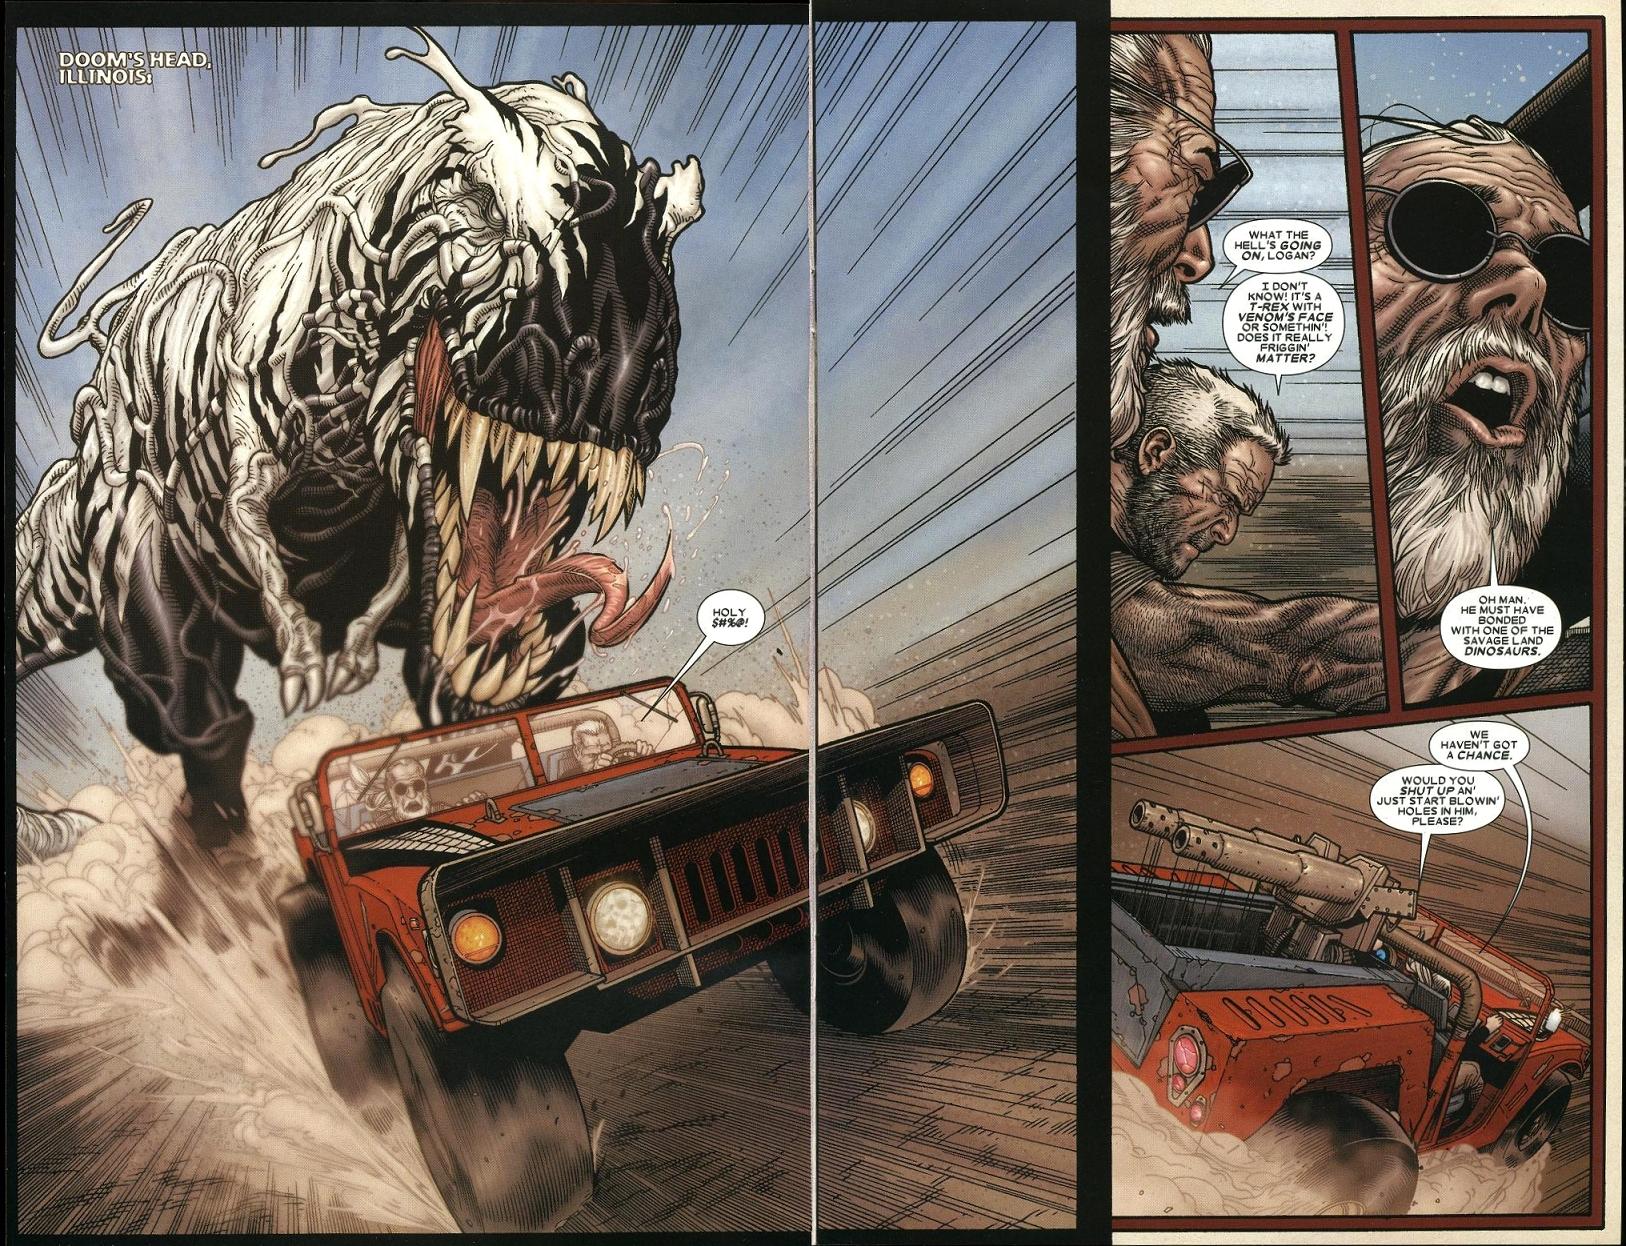 ...What if the alien symbiote Venom attached itself to a dinosaur?̶...